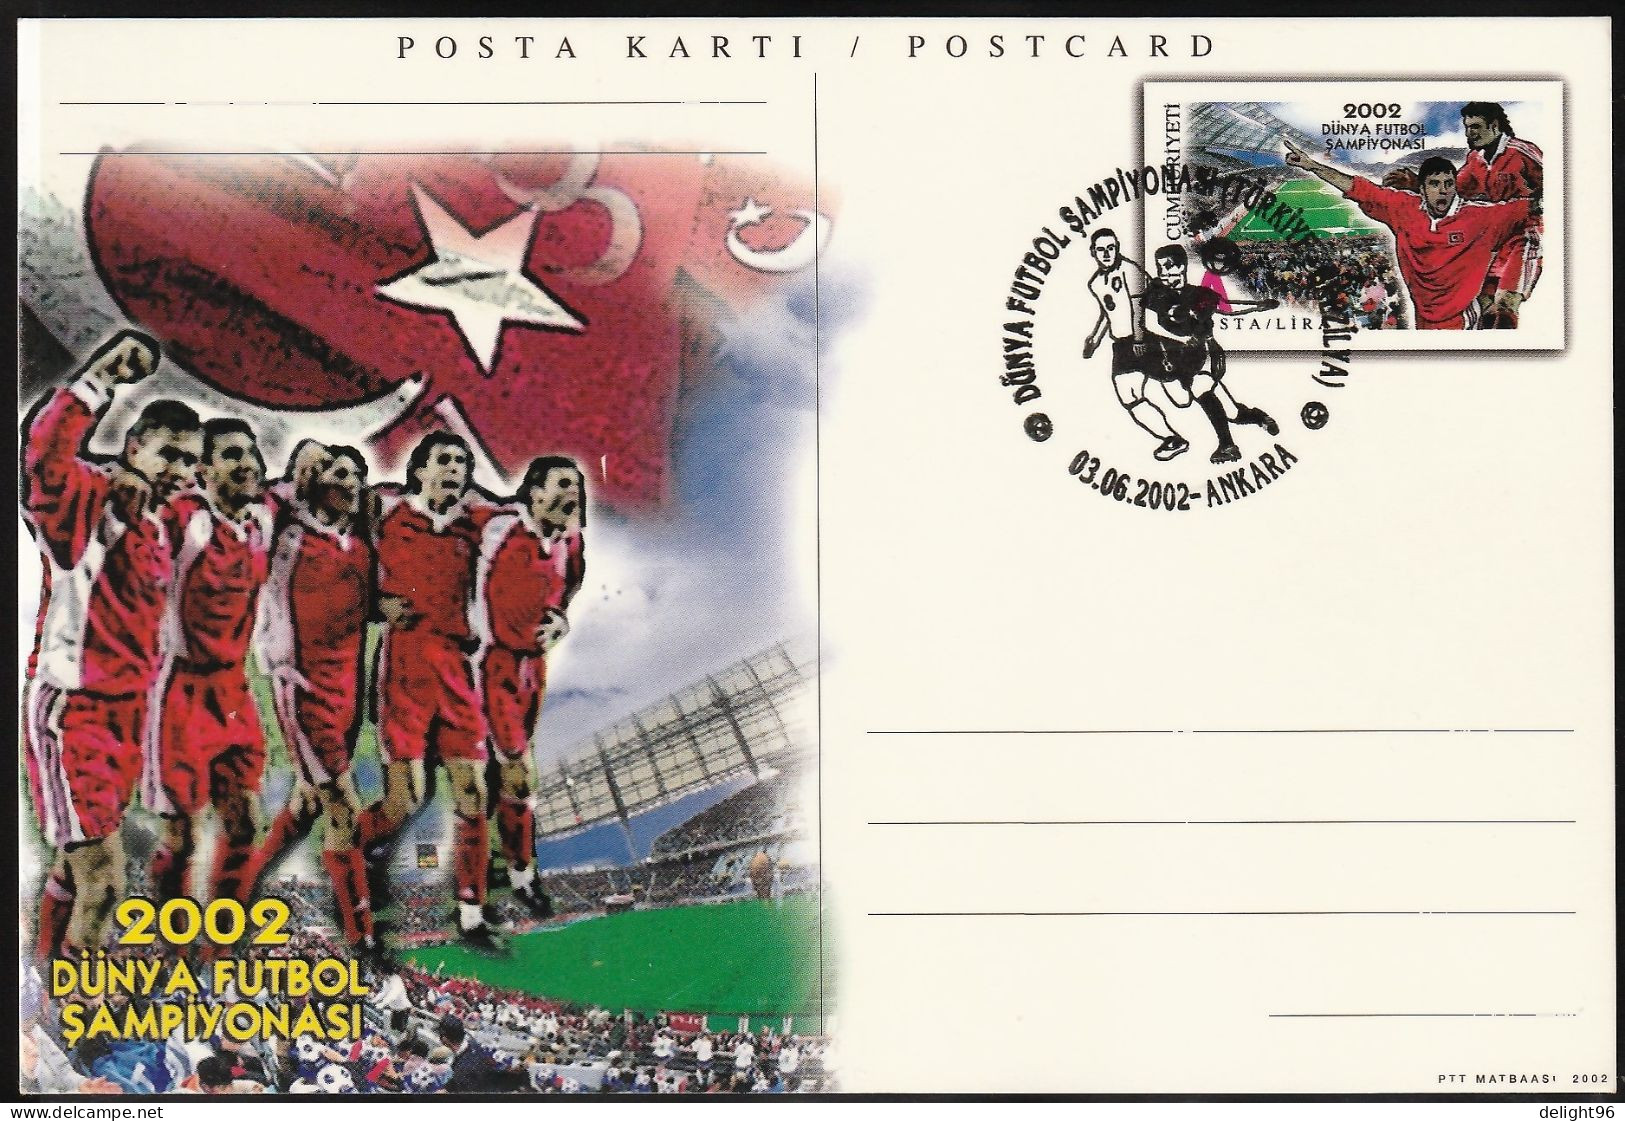 2002 Turkey Group Stage Match Vs. Brazil At FIFA World Cup In South Korea-Japan Commemorative Cancellation On PSC - 2002 – Zuid-Korea / Japan